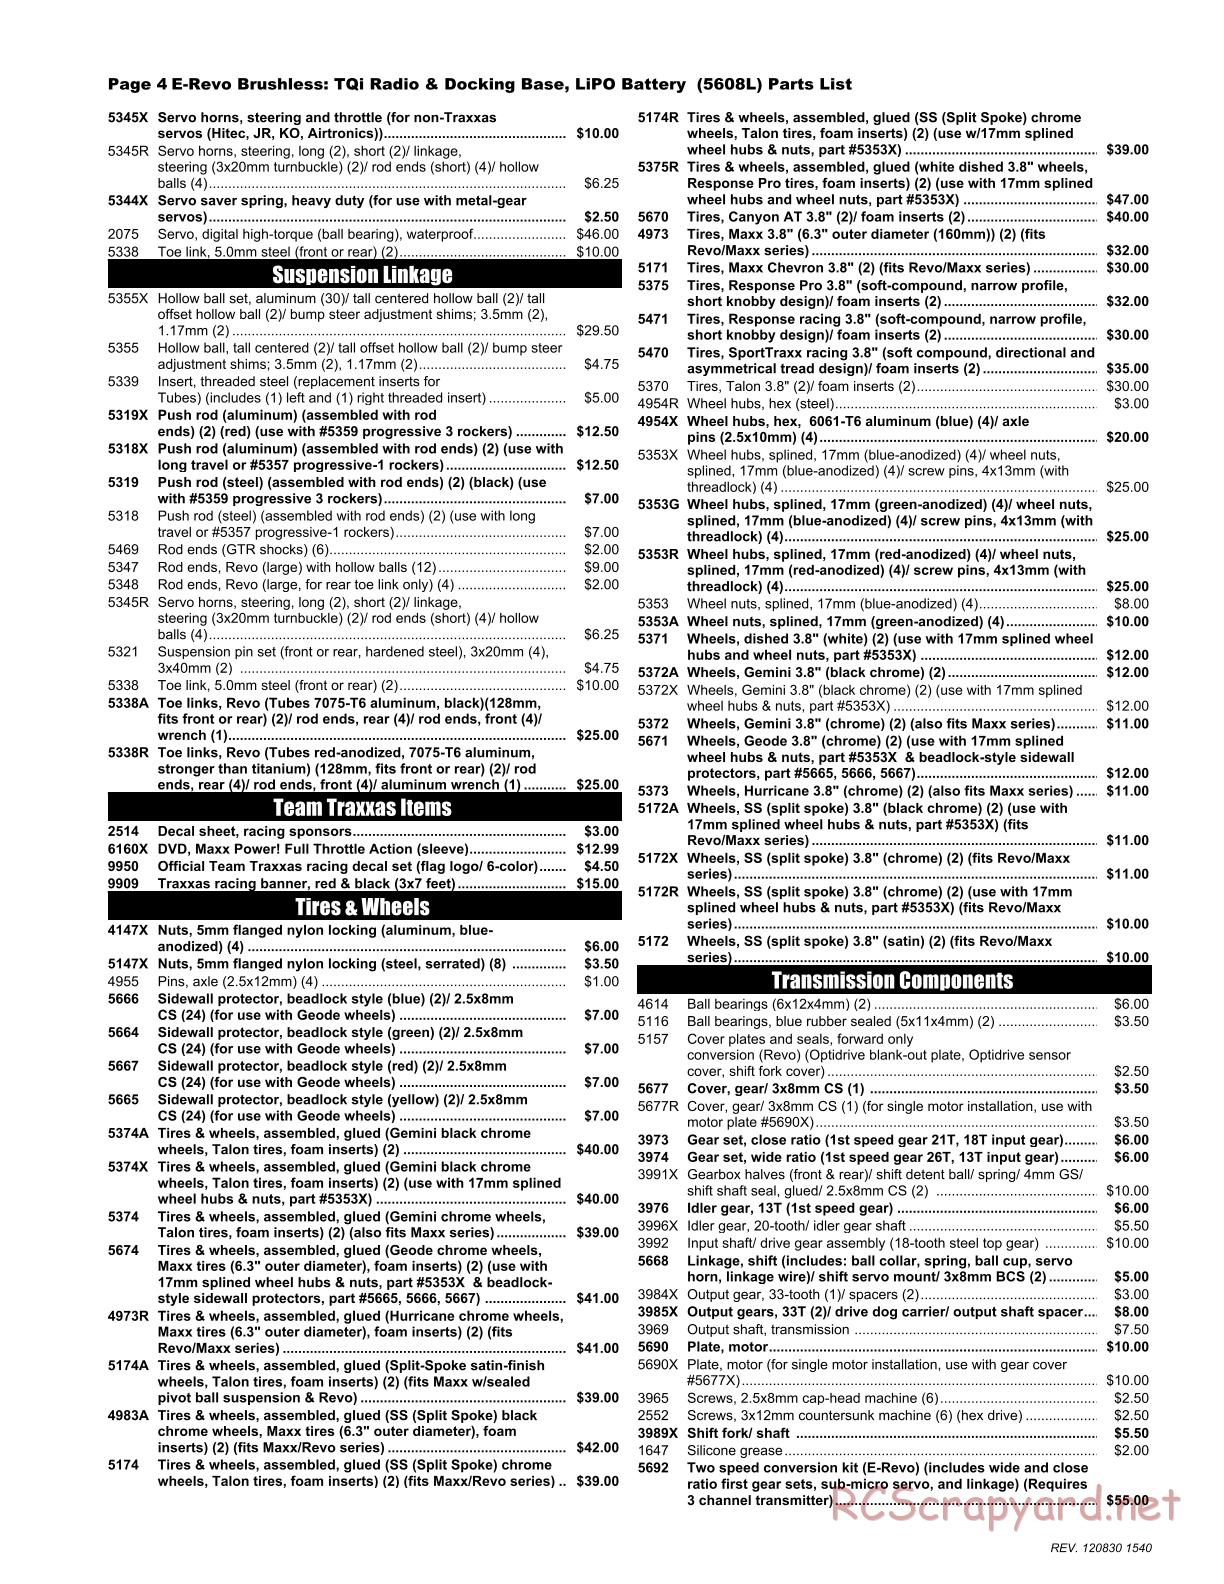 Traxxas - E-Revo Brushless (2012) - Parts List - Page 4